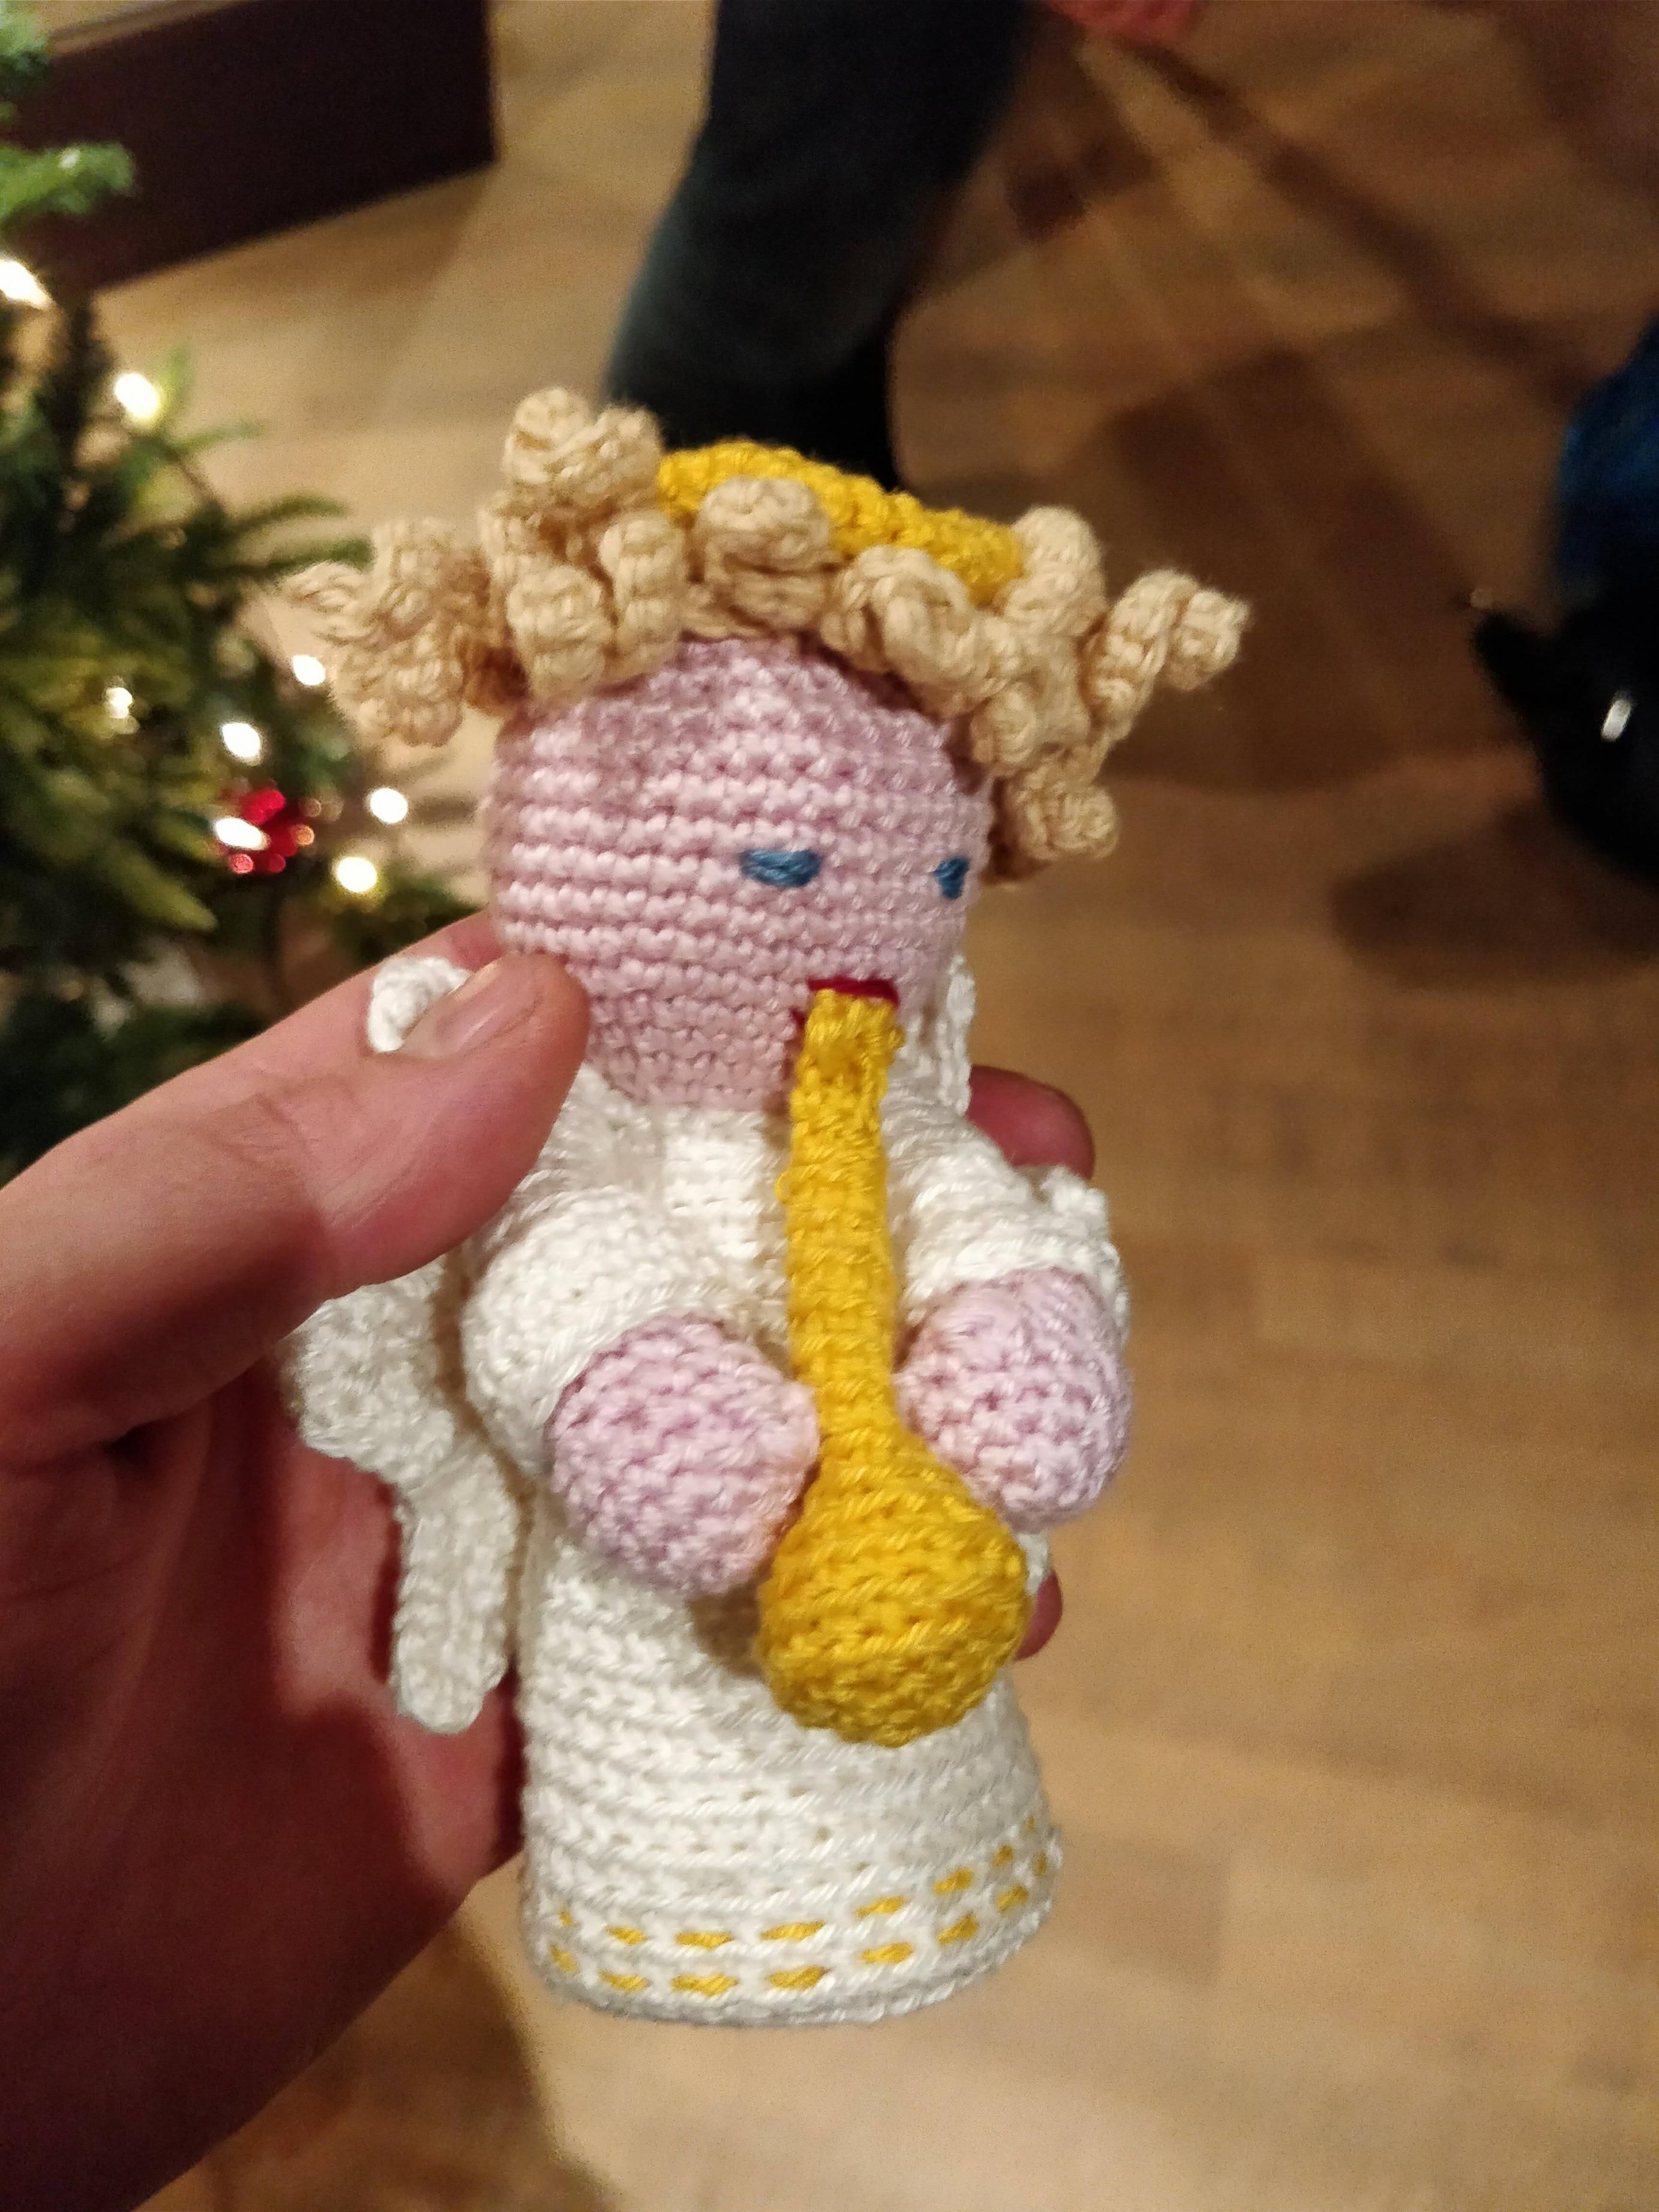 This Xmass ornament my aunt made looks like an angel taking a bong hit.